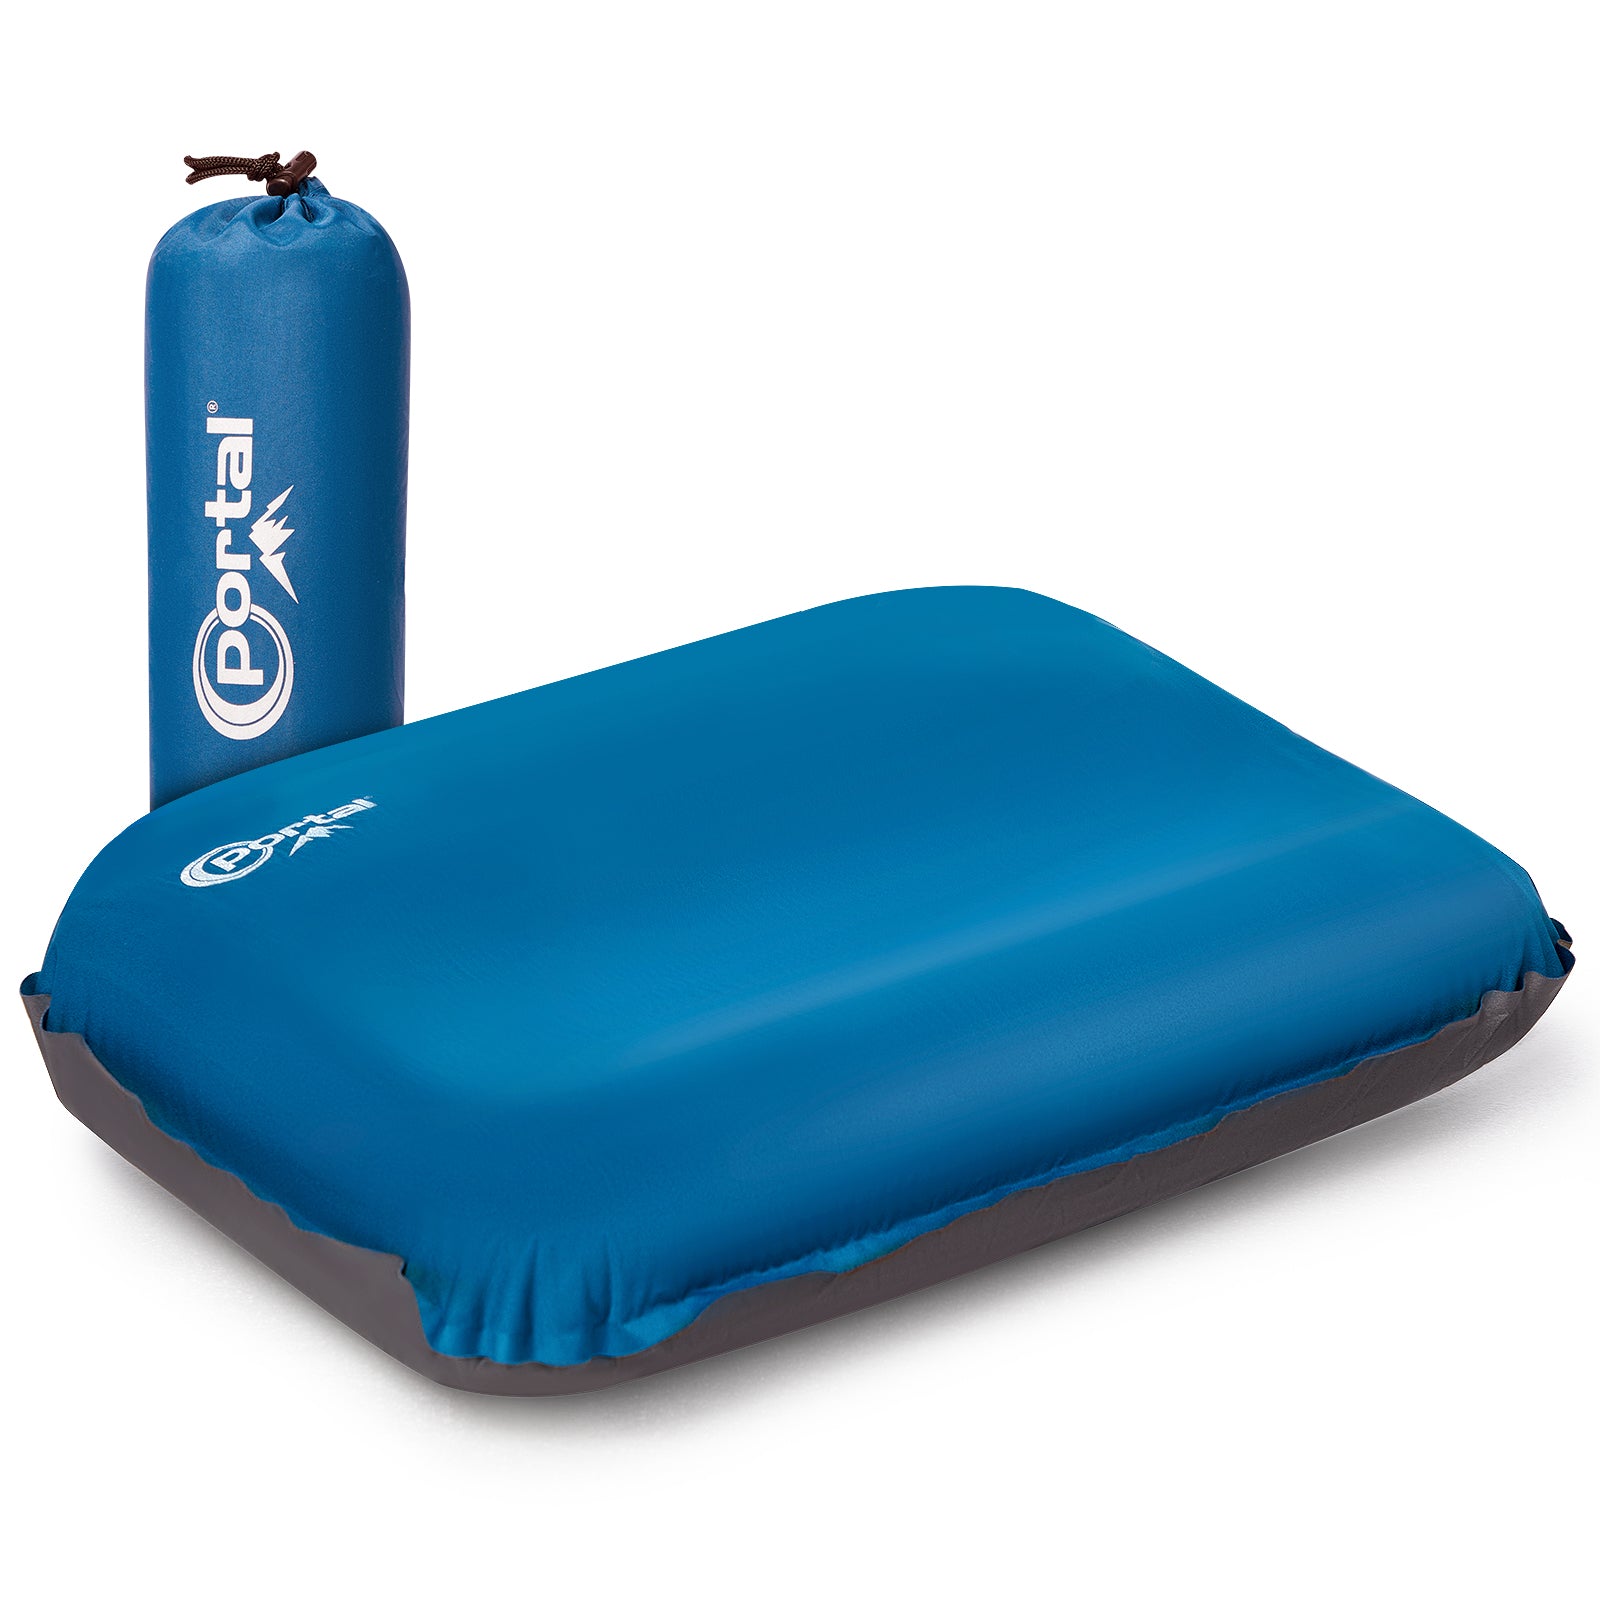 Self Inflatable Cushion Portable Rest Air Pillow Compact Travel Camping  Office